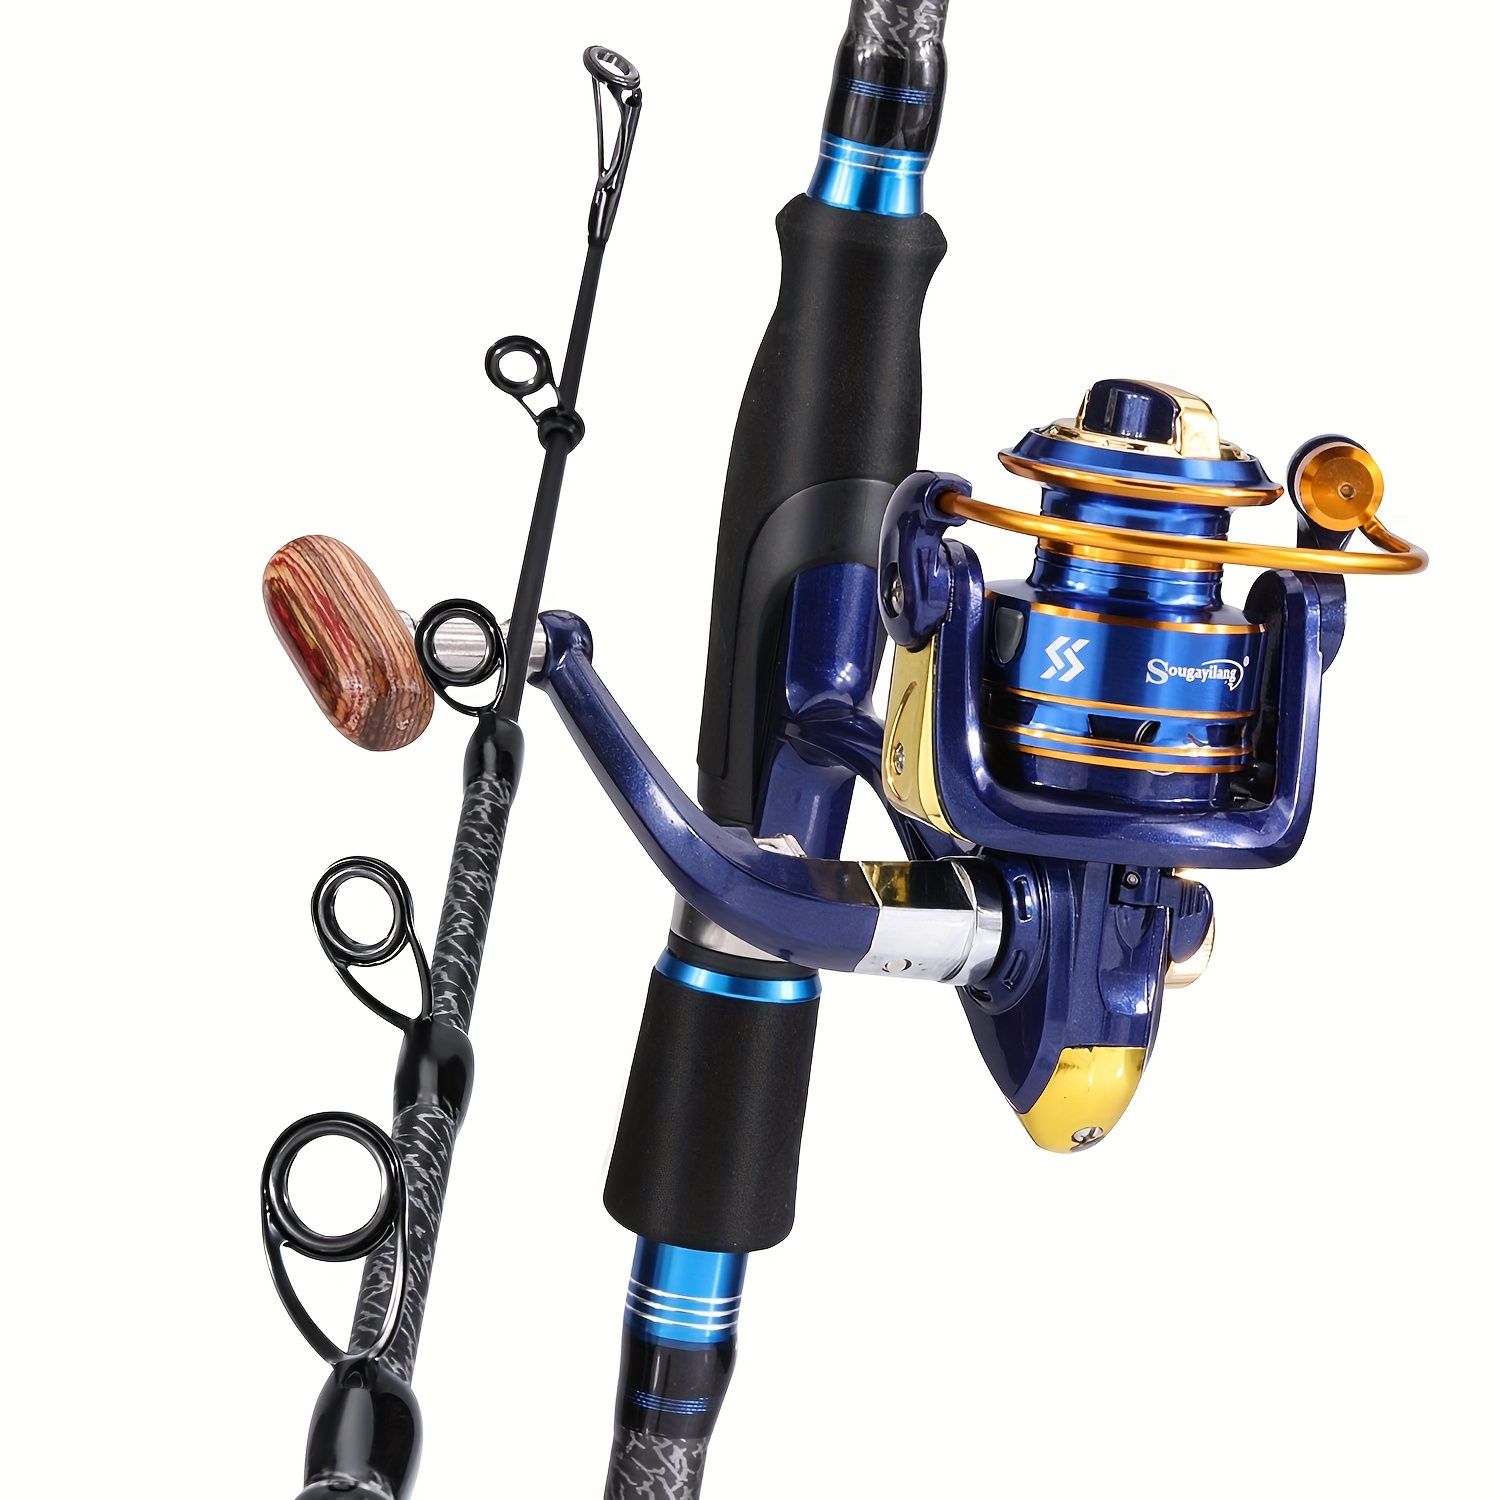  Sougayilang Spinning Fishing Rod Reel Combos,24-Ton Carbon  Fiber Protable Fishing Poles with Spinning Reel for Travel Freshwater  Fishing-1.8M Blue Crown with Bag : Sports & Outdoors